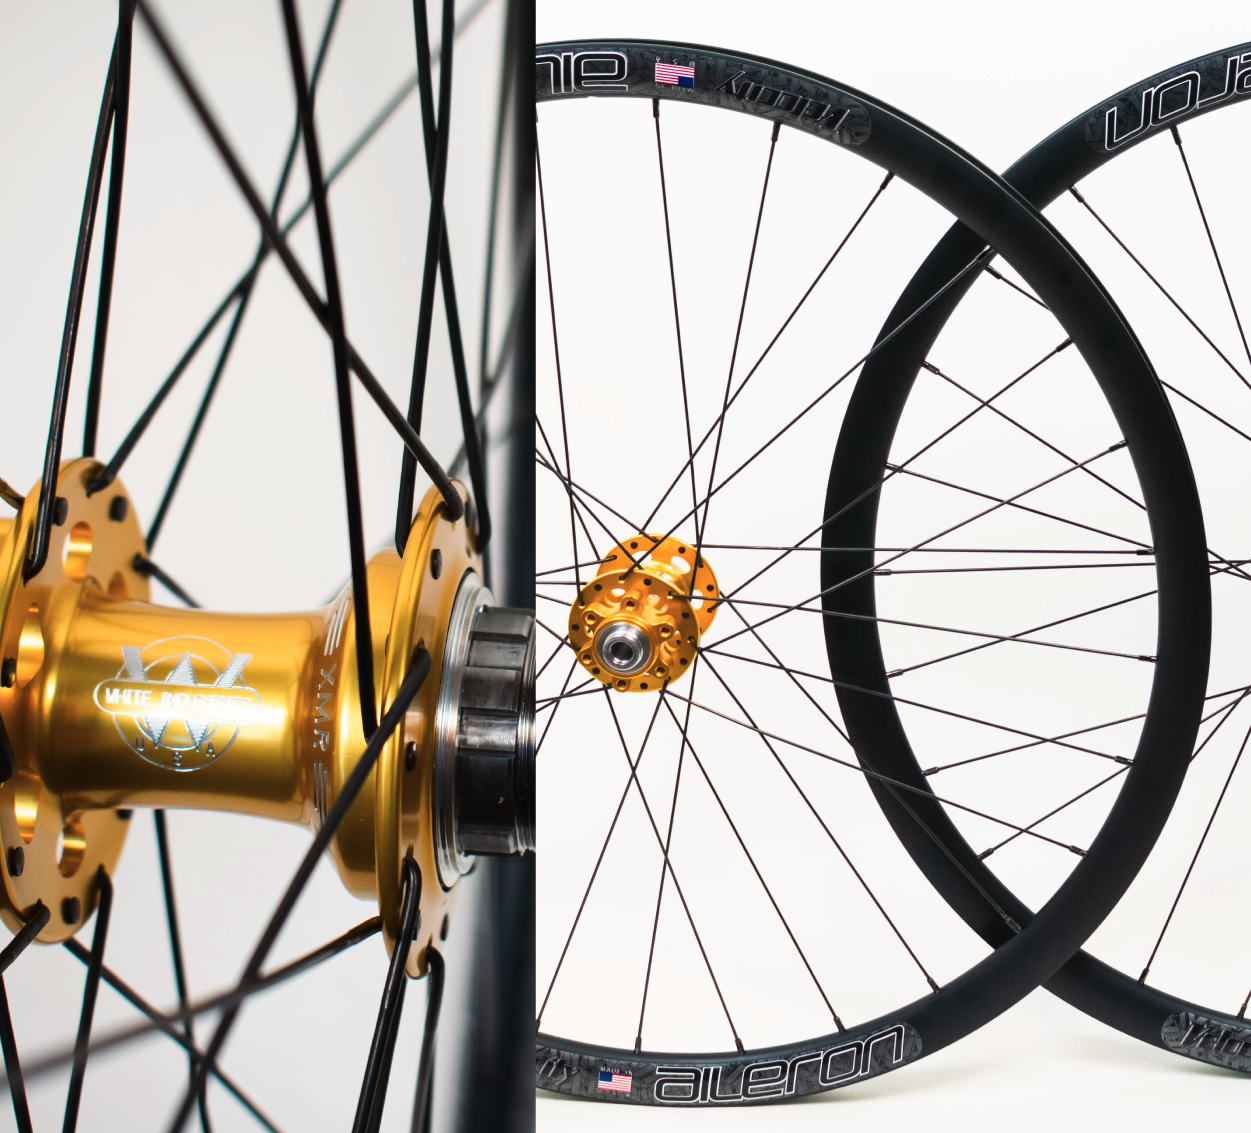 Wheel Build Feature: The Versatility of White Industries CLD Hubs and Velocity Aileron